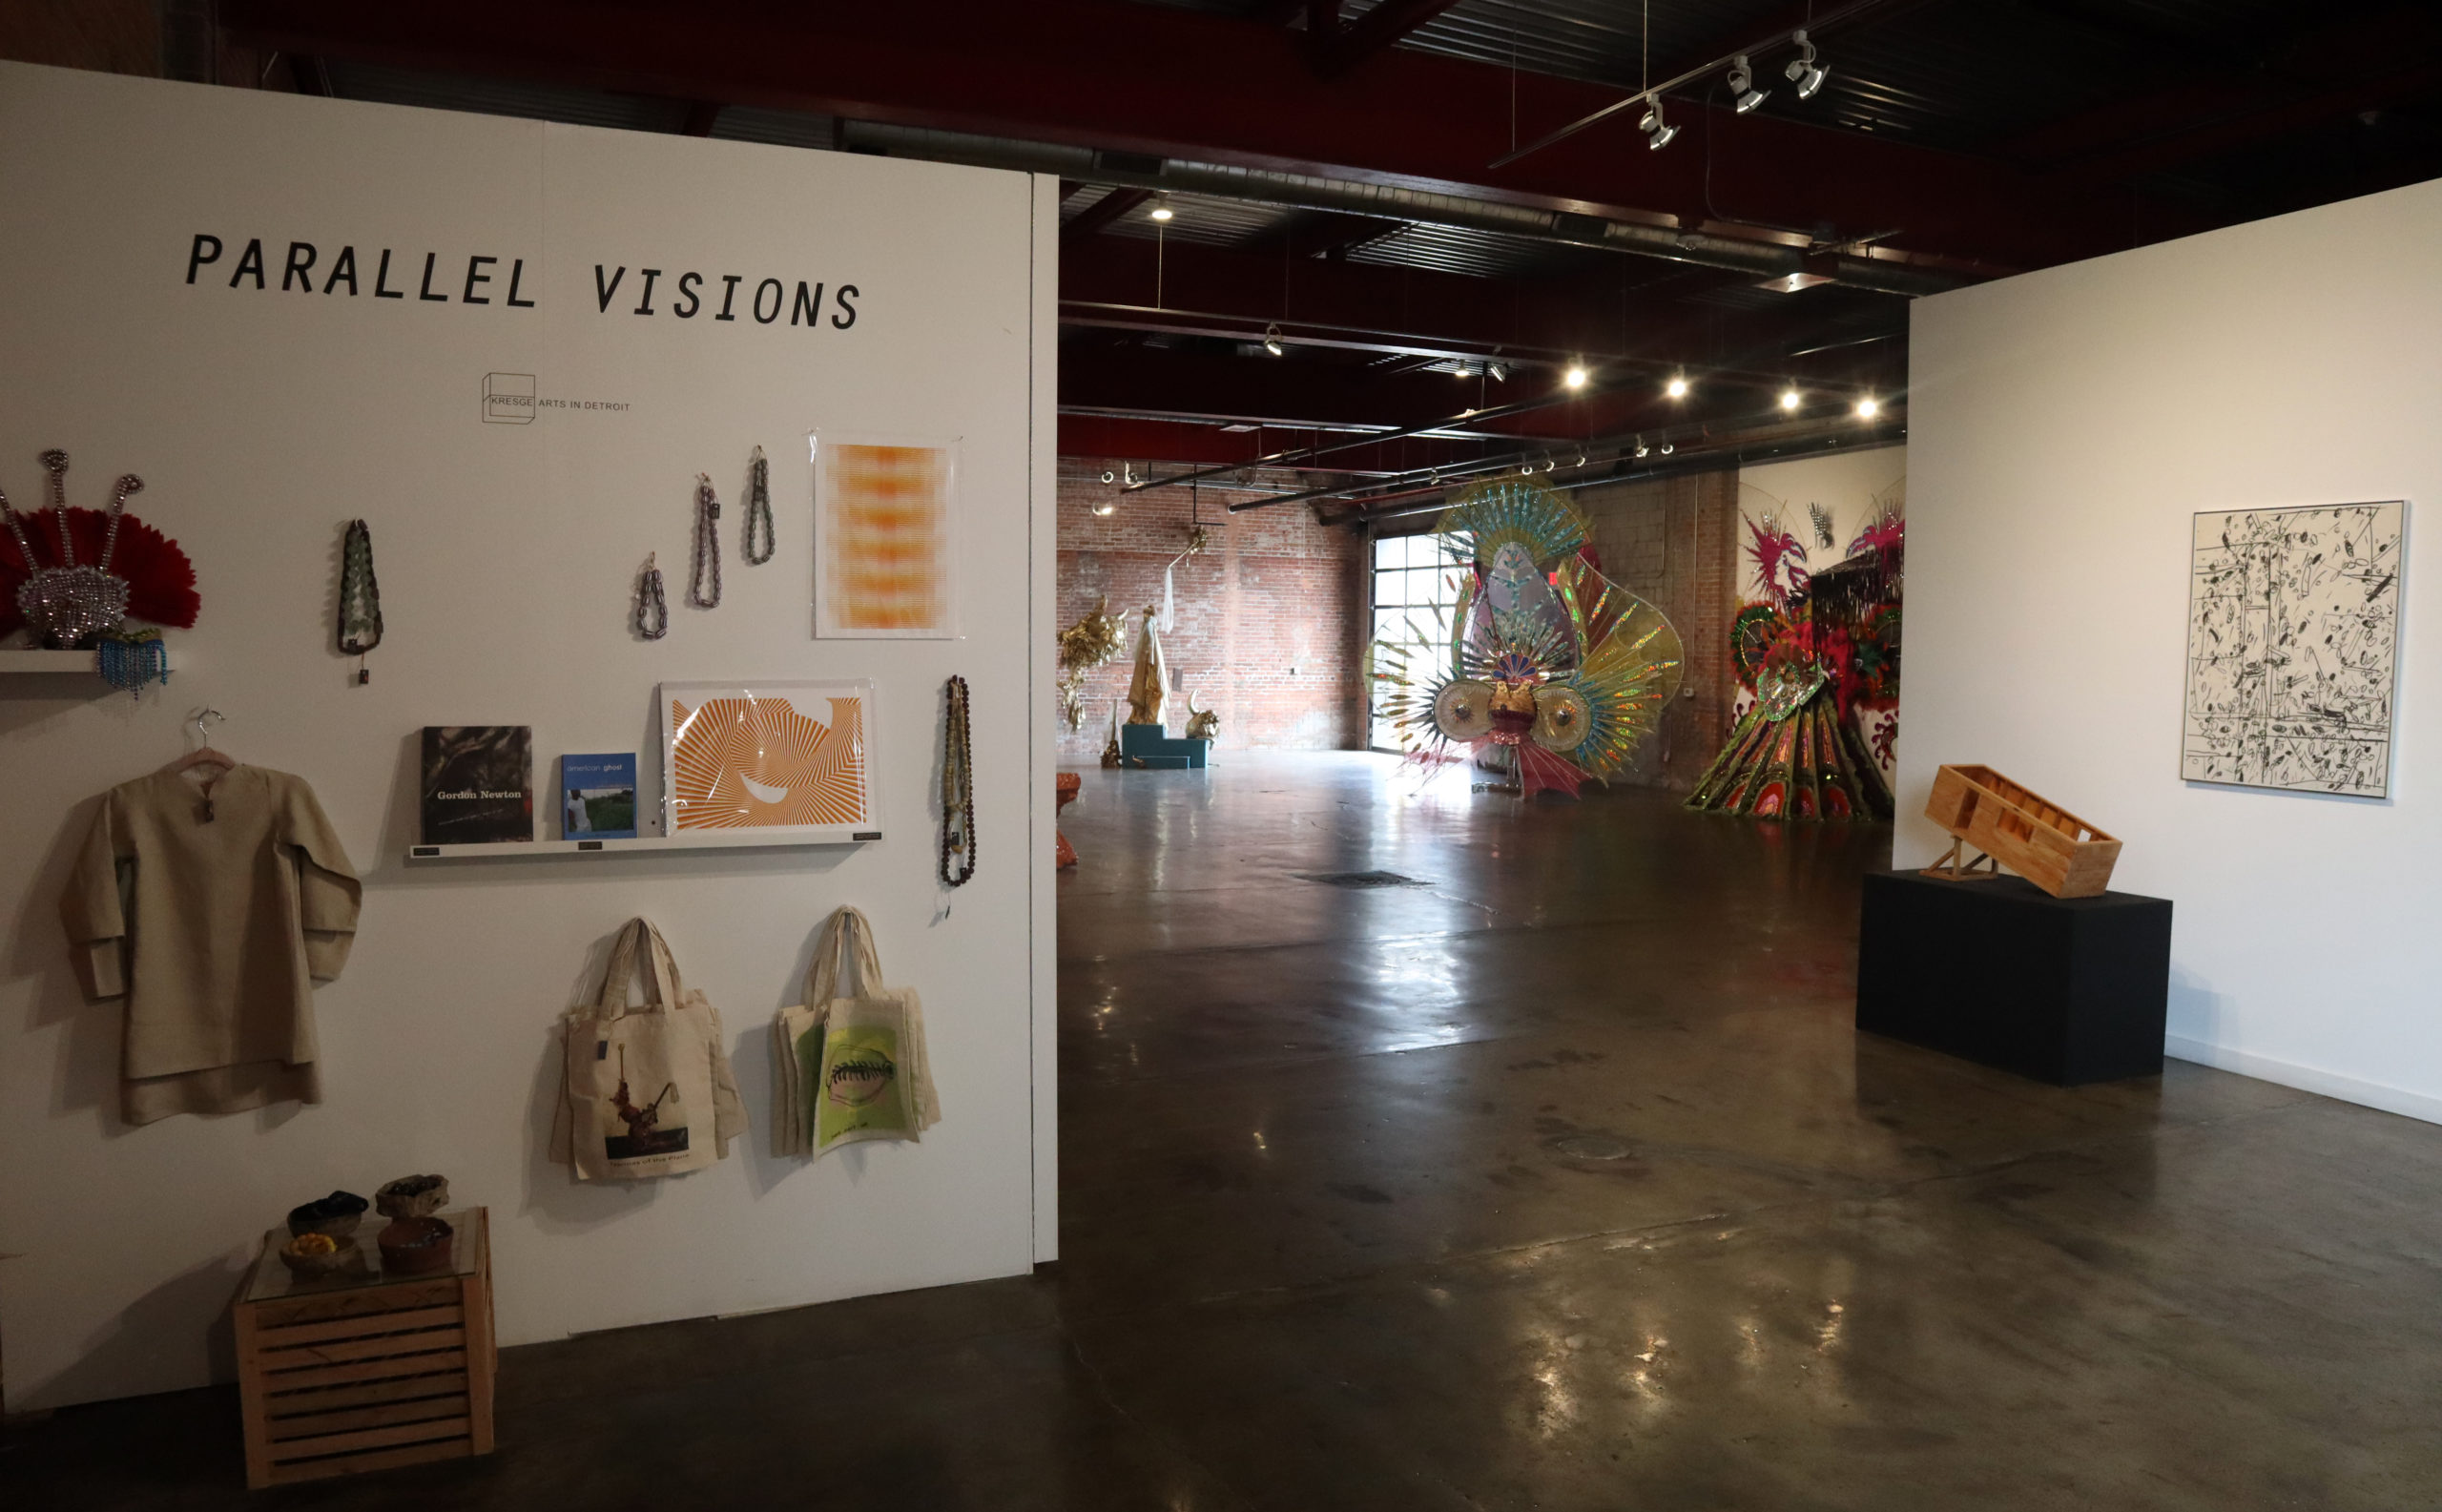 Wasserman Projects exhibit called 'Parallel Visions'